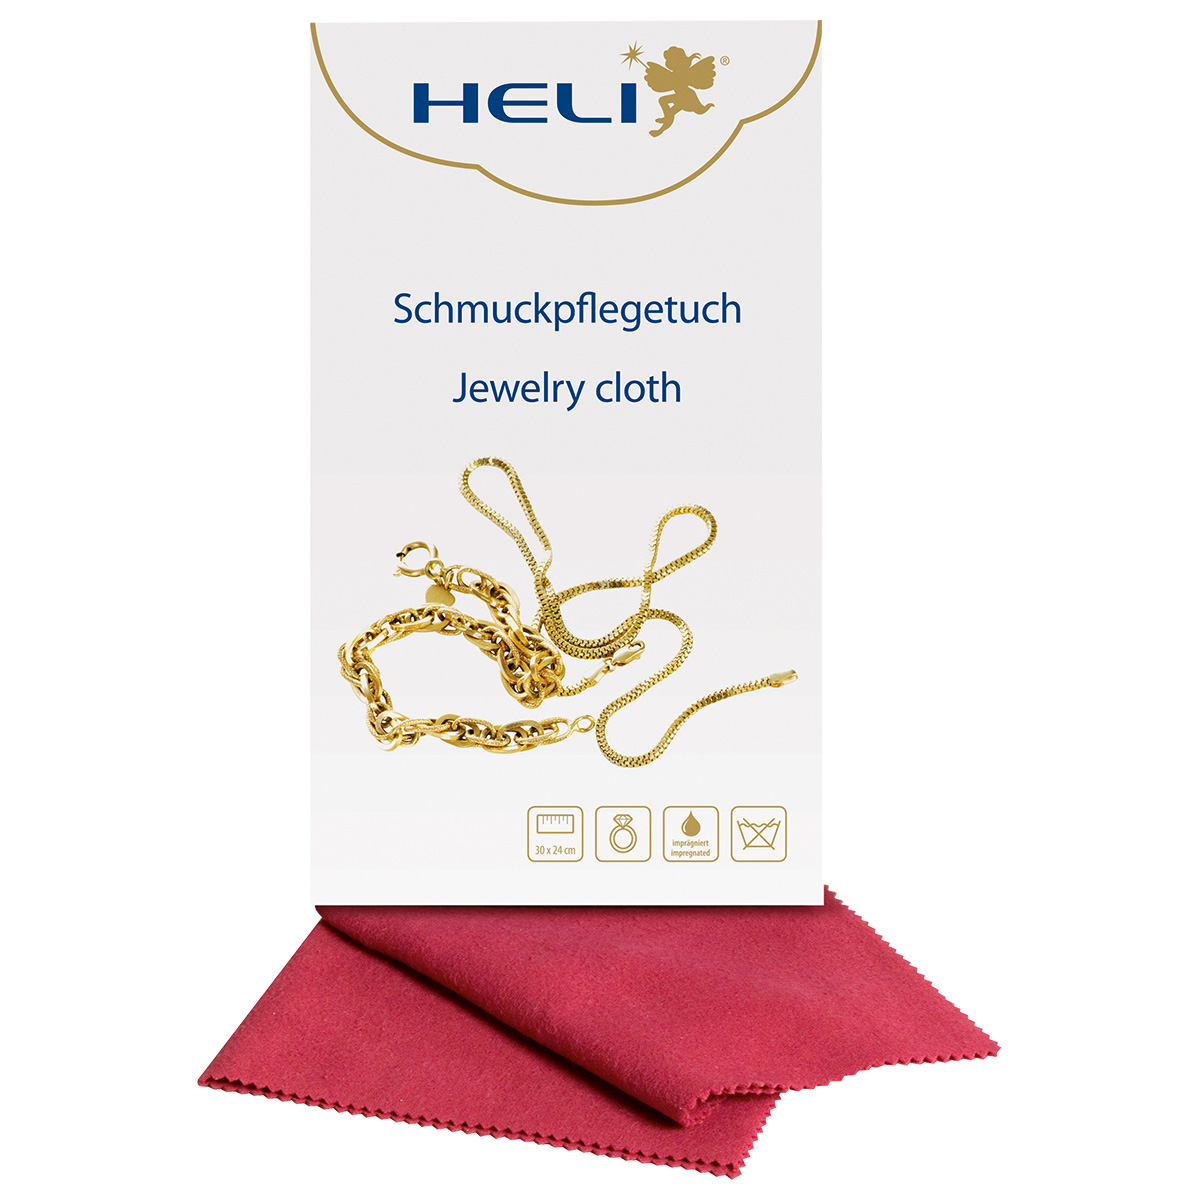 Heli jewelry cloth XXL for gentle cleaning,  jeweler's packaging